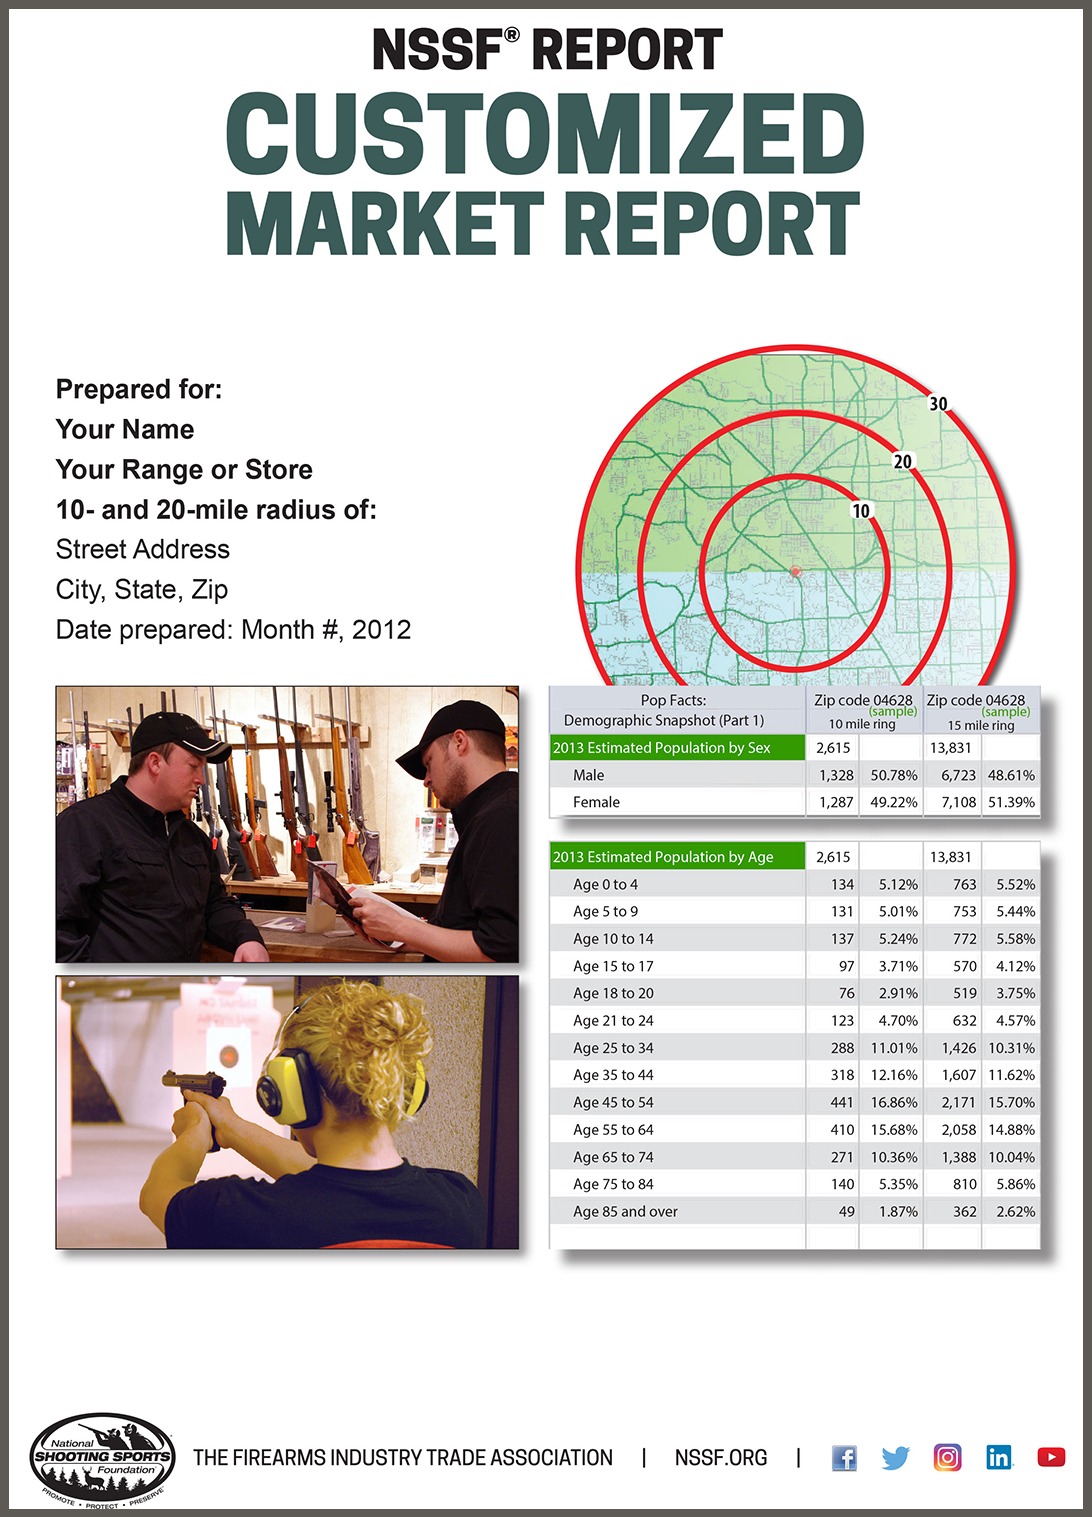 NSSF's Customized Market Report - the People and Businesses Around Your Enterprise